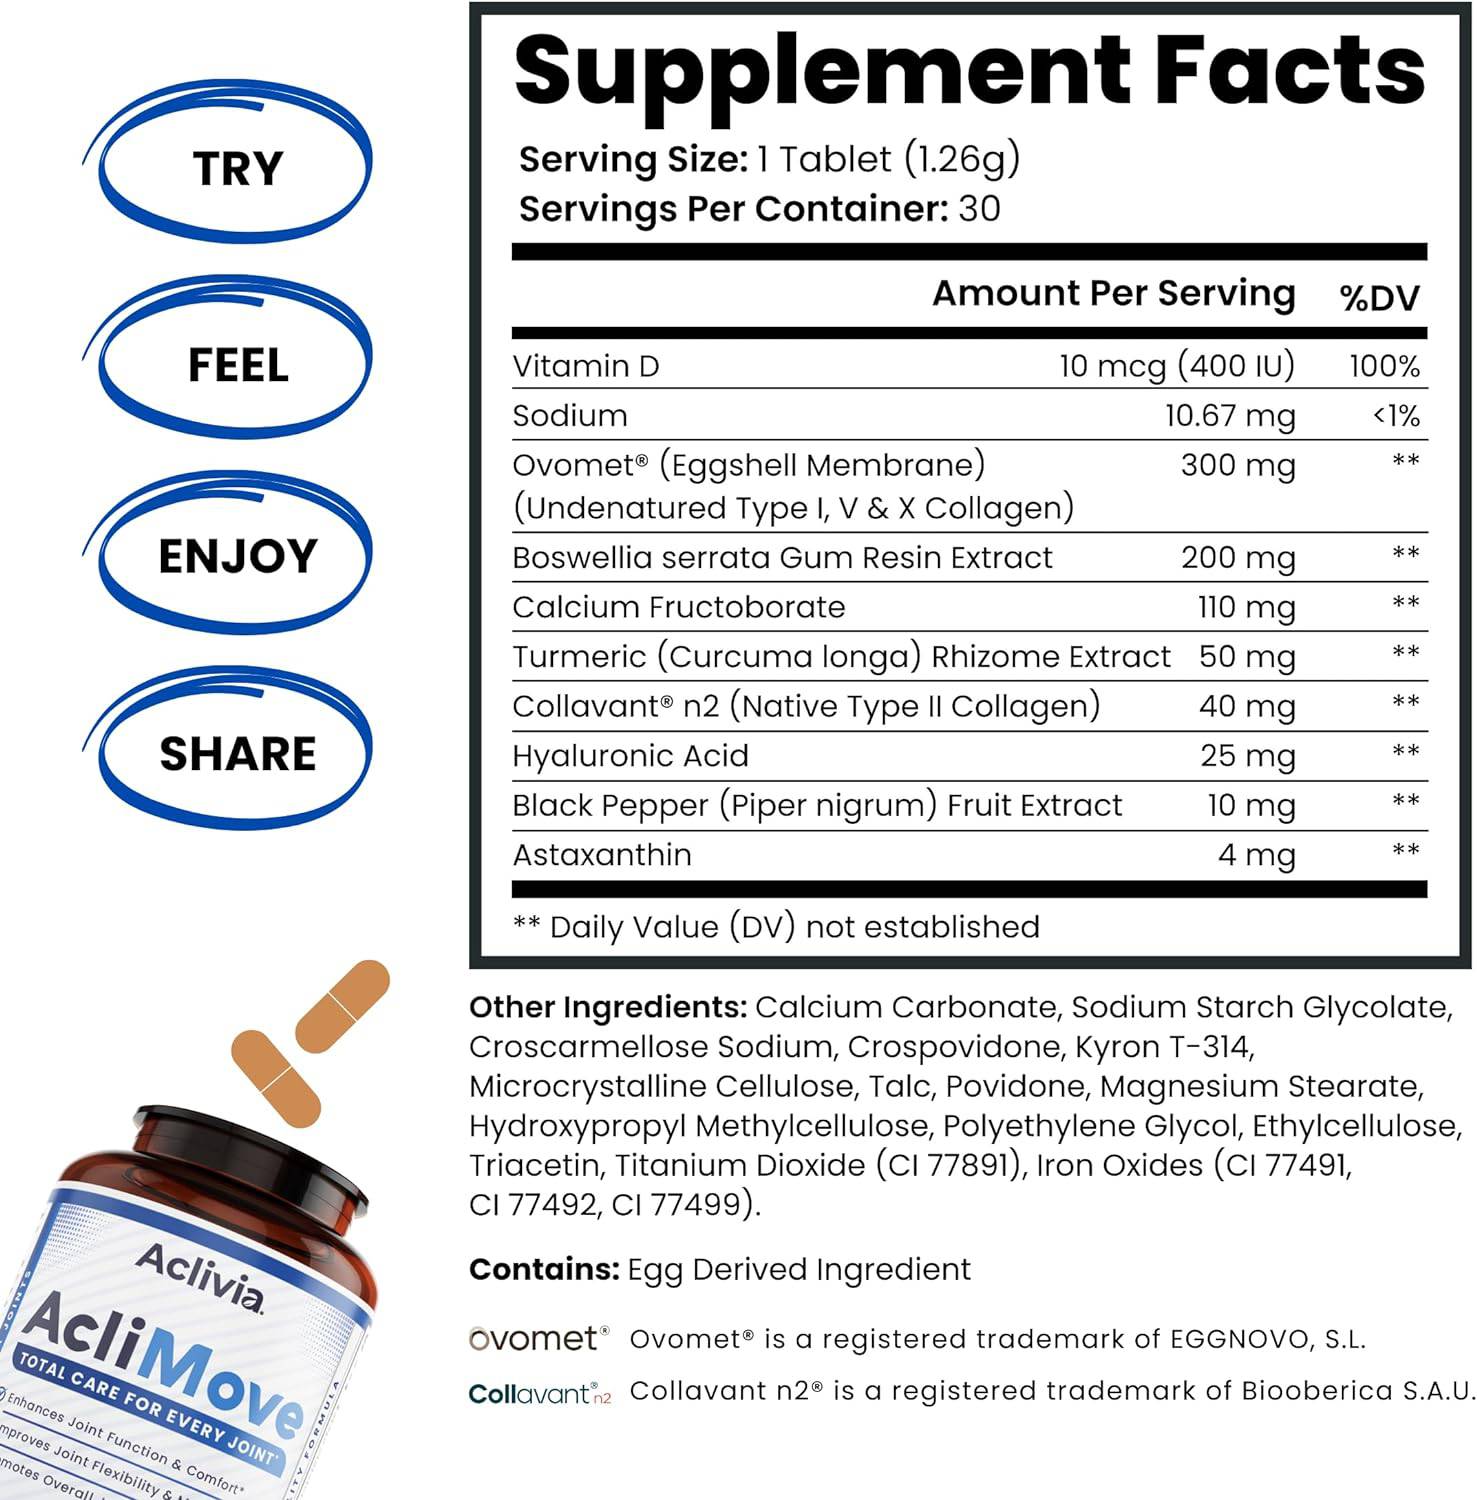 Aclivia Aclimove - Joint Support Supplement